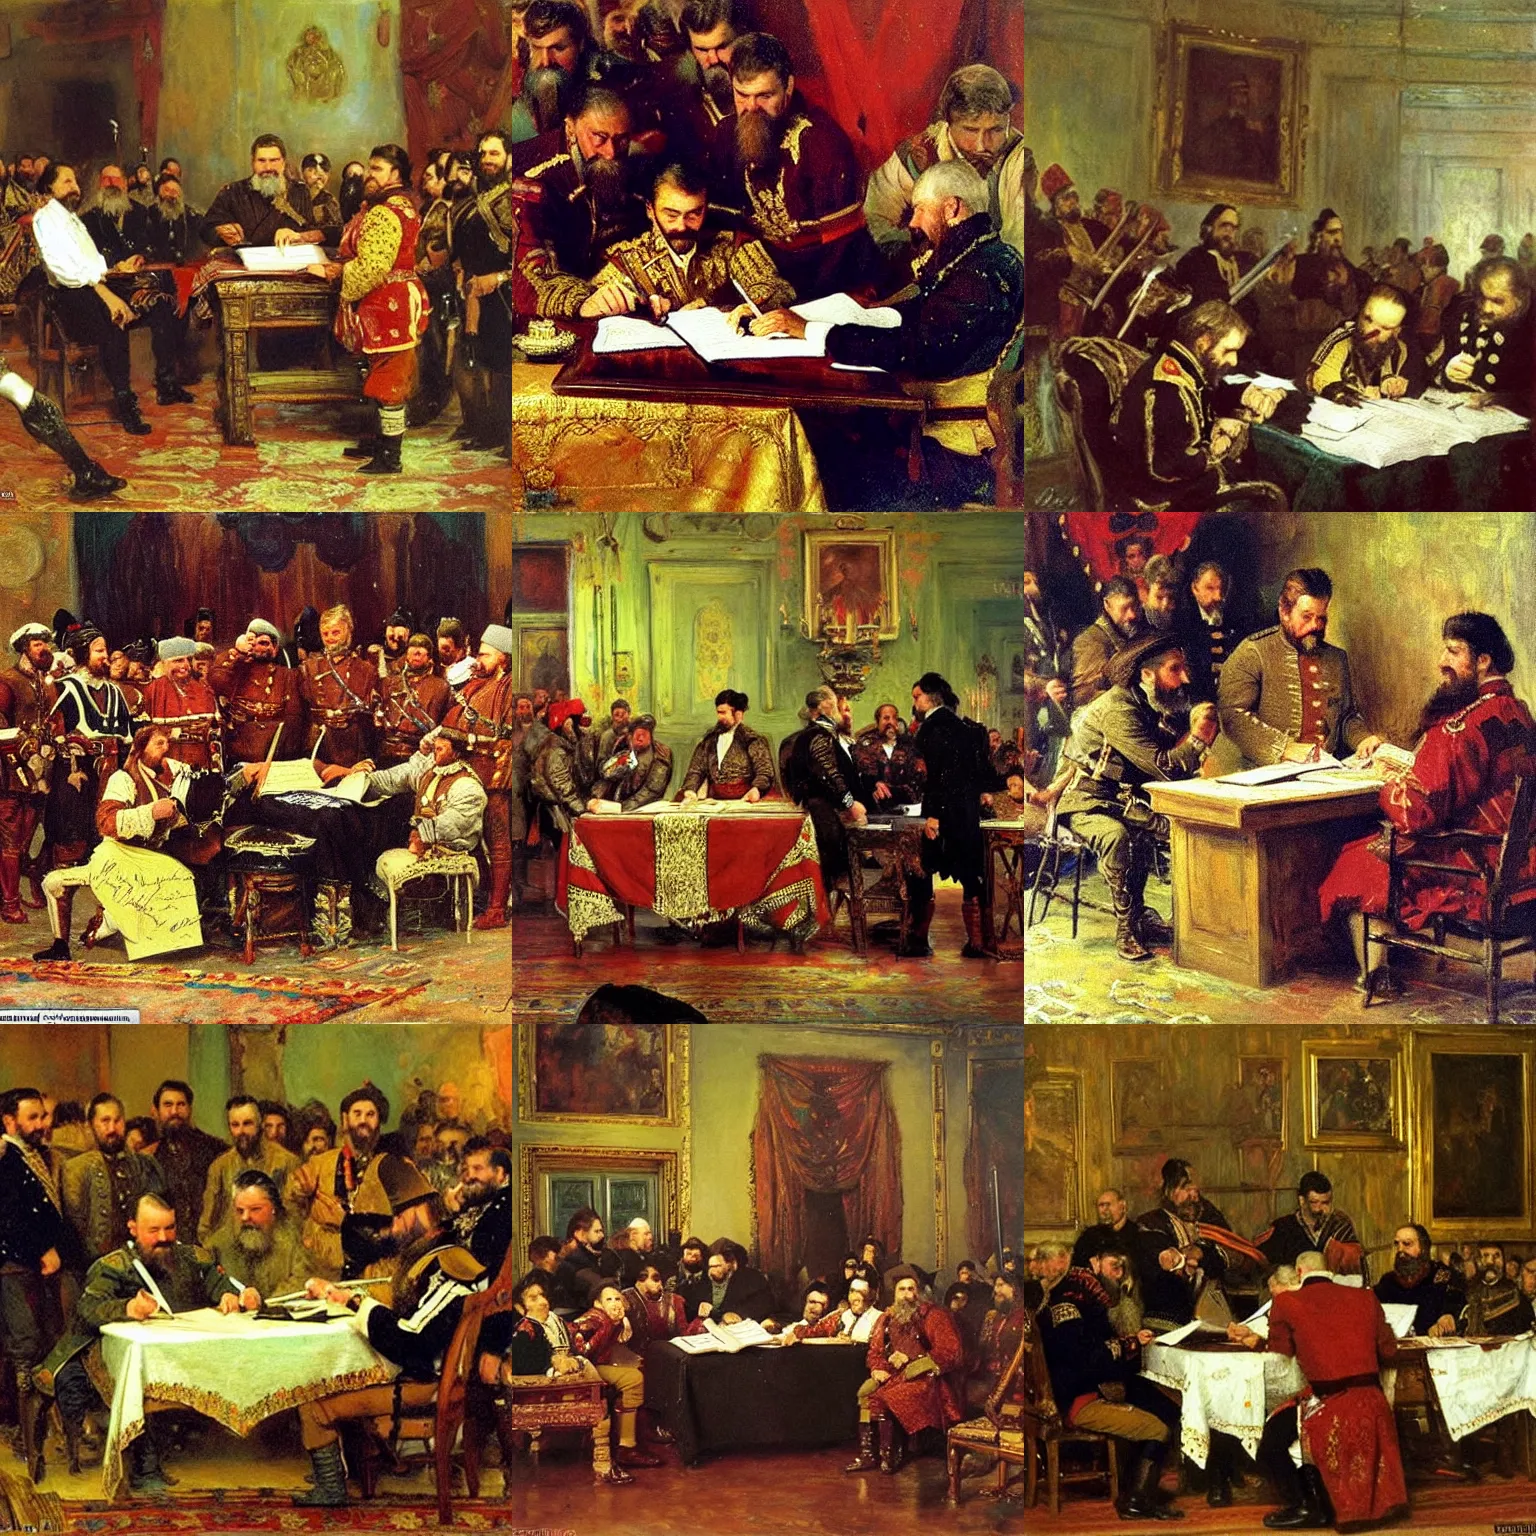 Prompt: Zaporozhian Cossacks signing the Constitution of the United States, painting by Ilya Repin